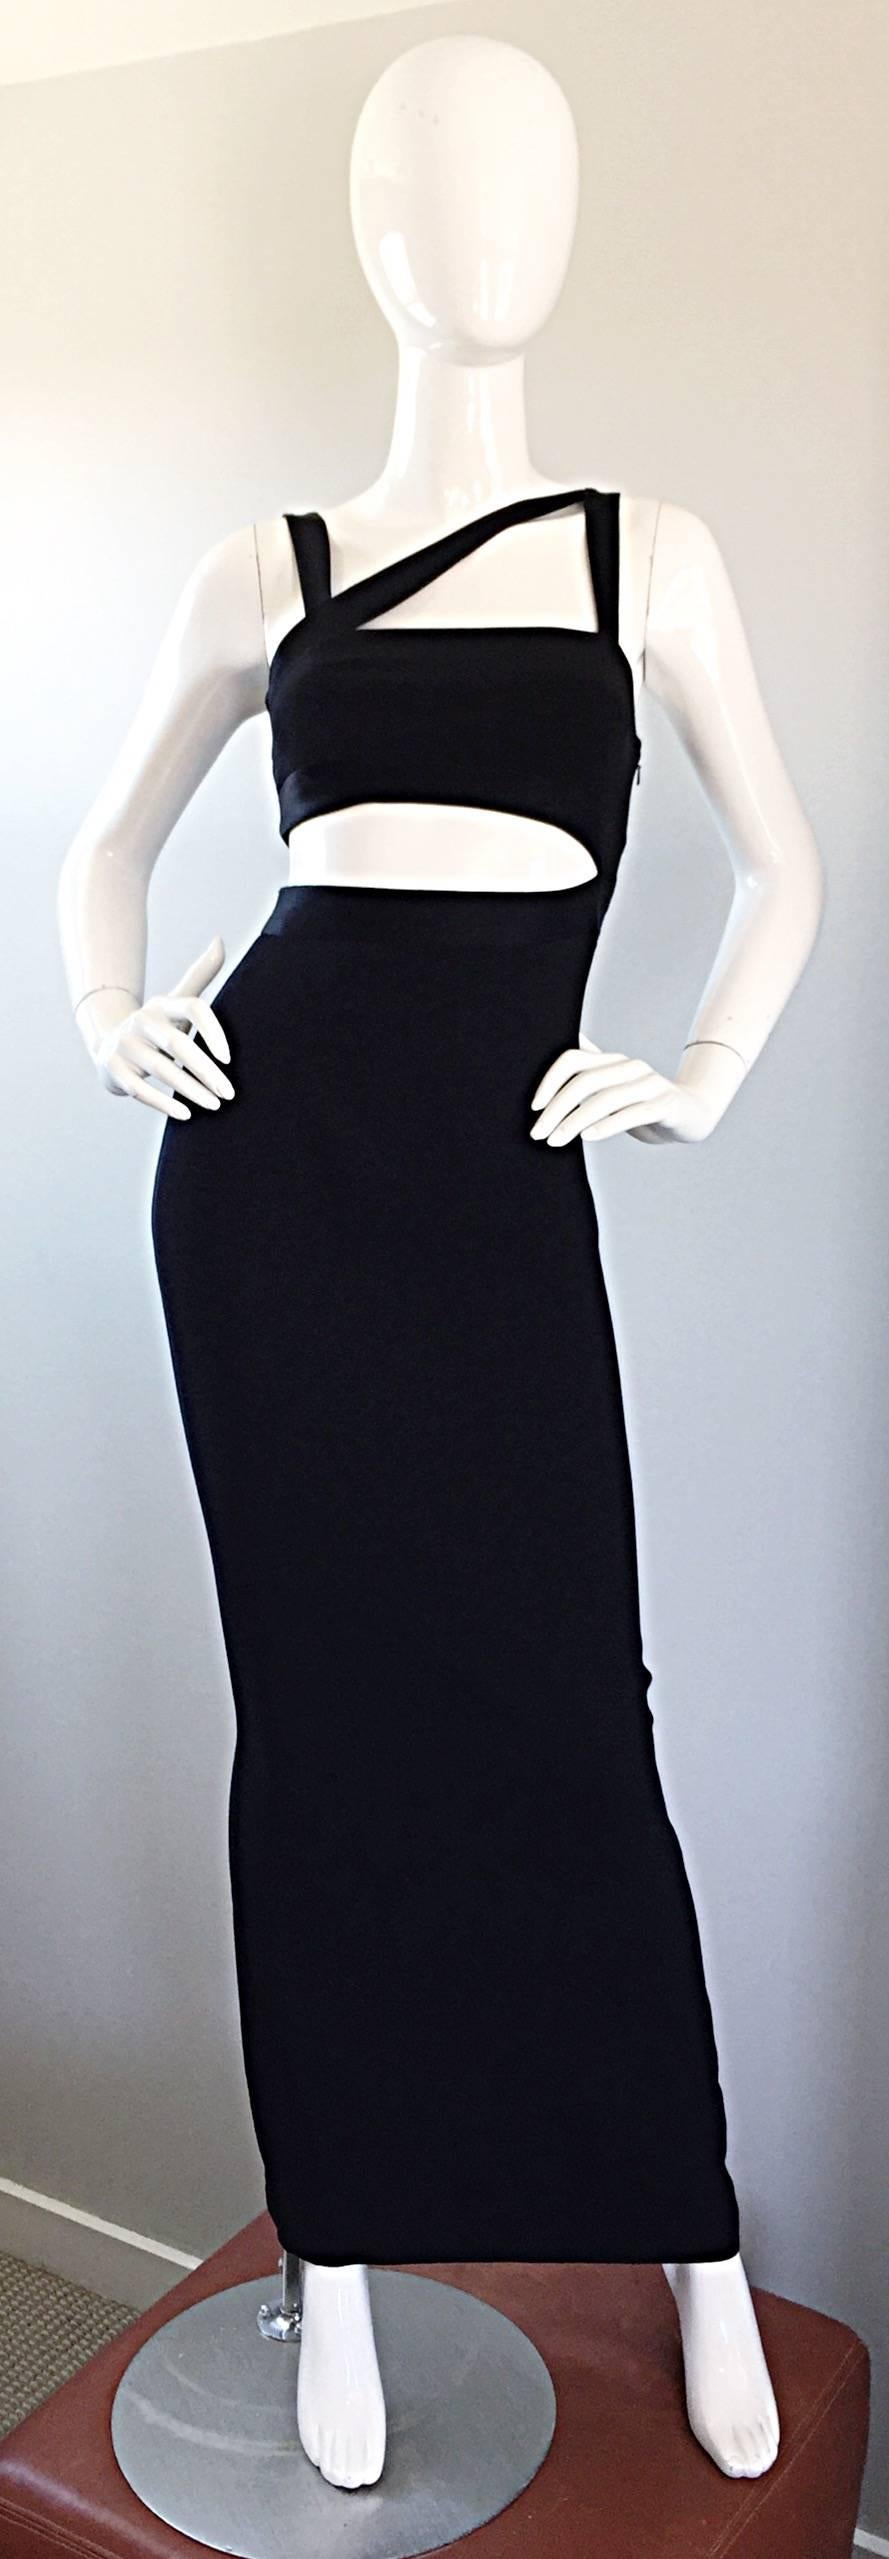 Sexiest vintage LILLIE RUBIN black cut-out bodcon full length evening dress! Sexy flattering body hugging fit hugs the body in all the right places. Slit up the back center reveals just the right amount of skin. Hidden zipper up the side with